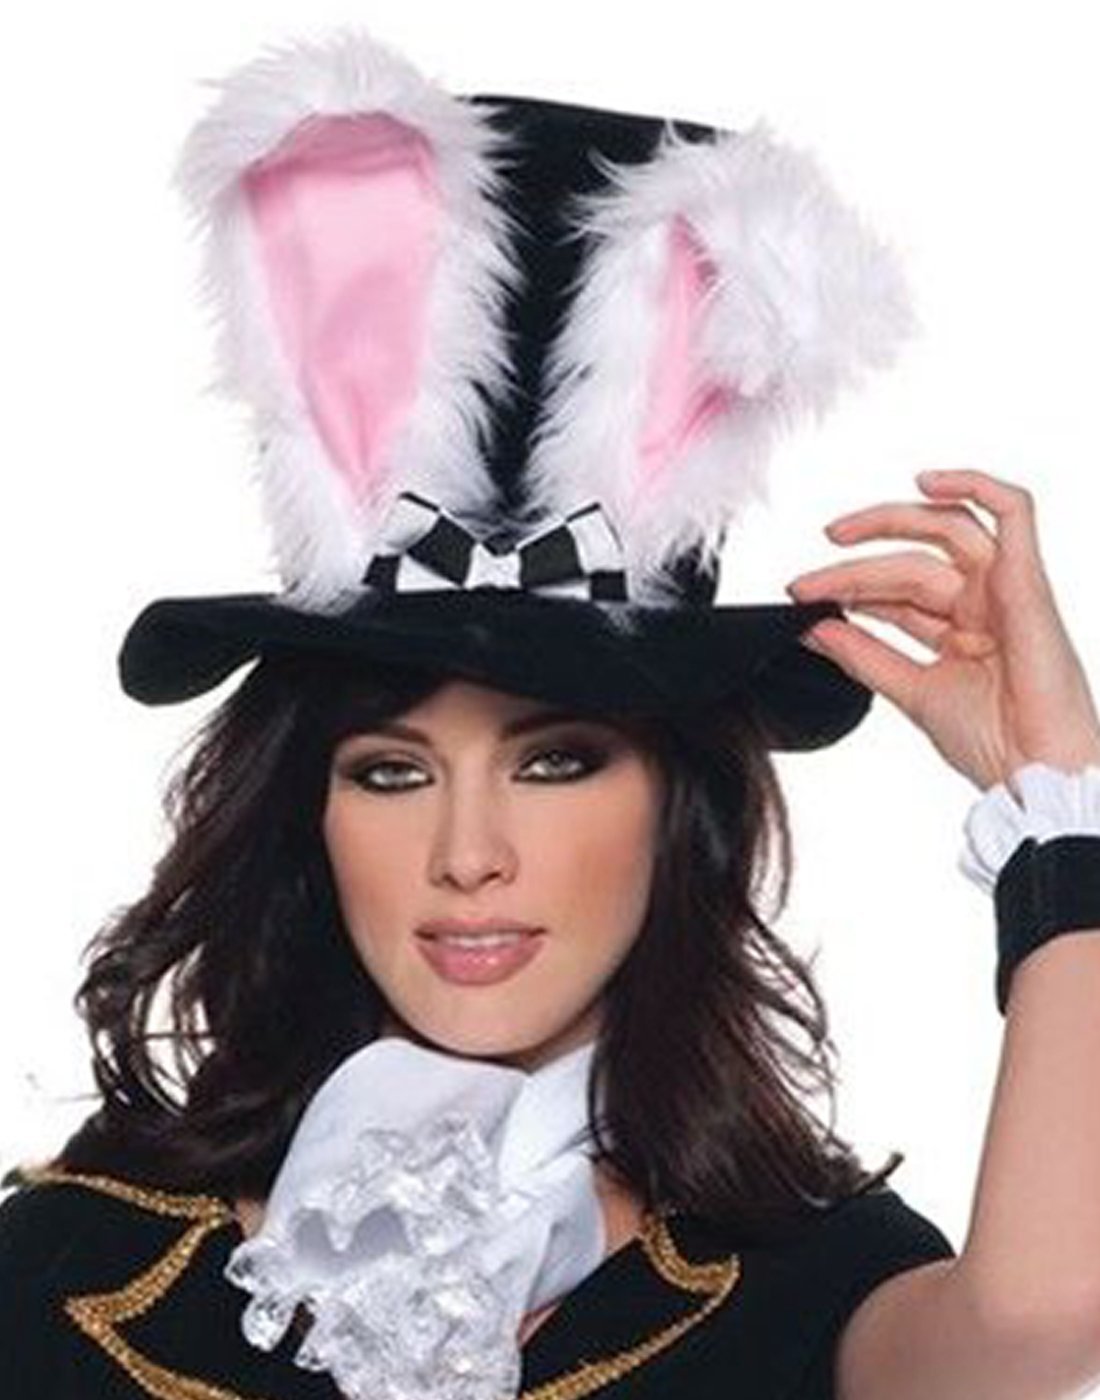 Women's Sexy Mad Hatter Costume - Totally Mad, Black/White, Medium